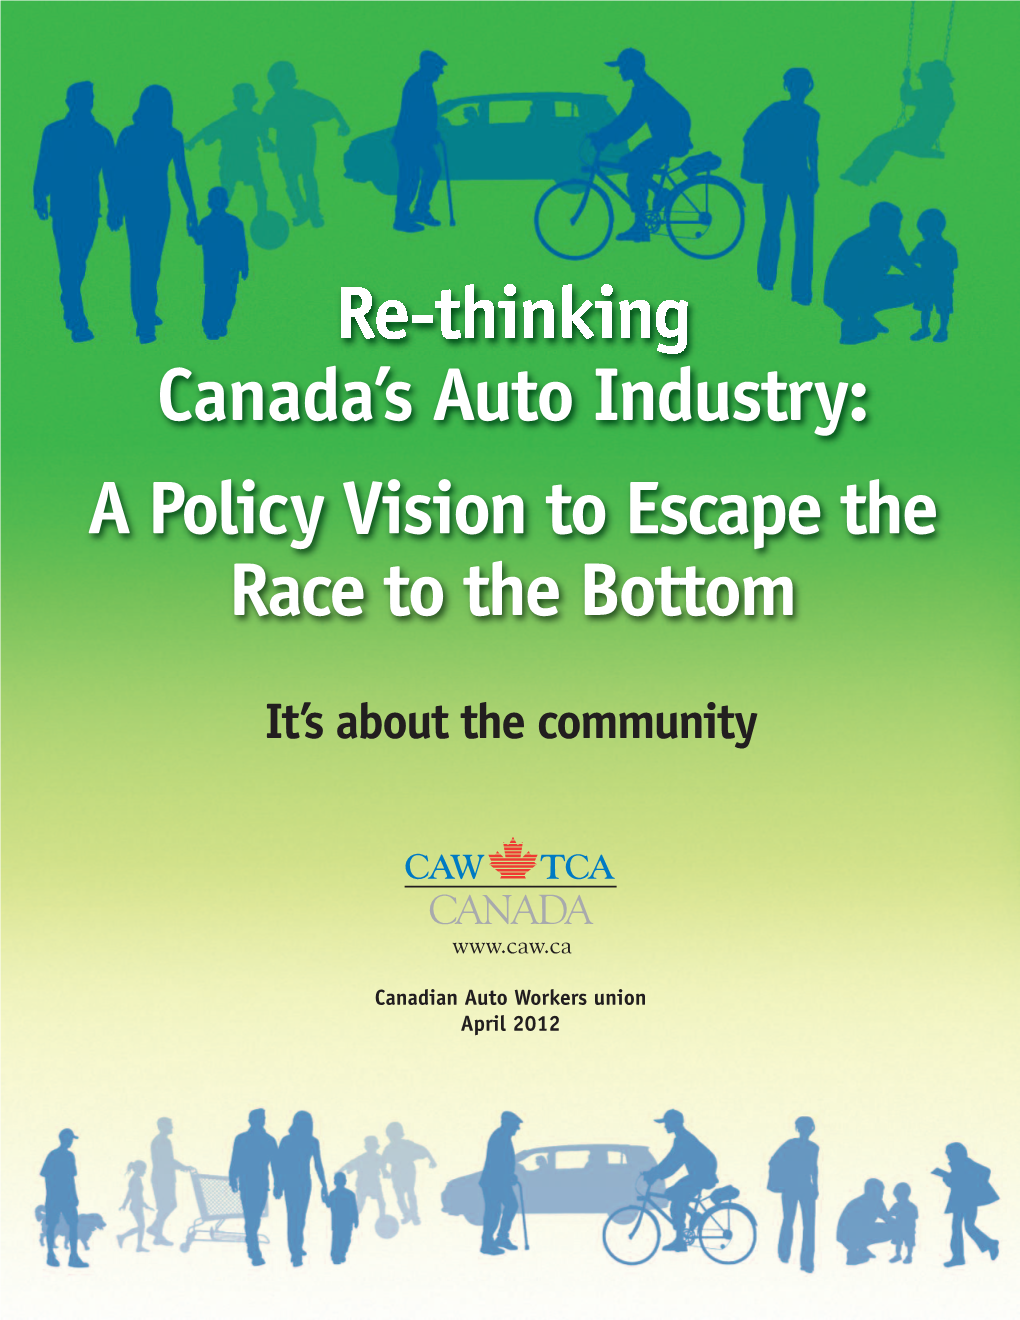 Canada ’S Auto Indust Ry: a Poli Cy Vision to Escape the Race to the Bottom